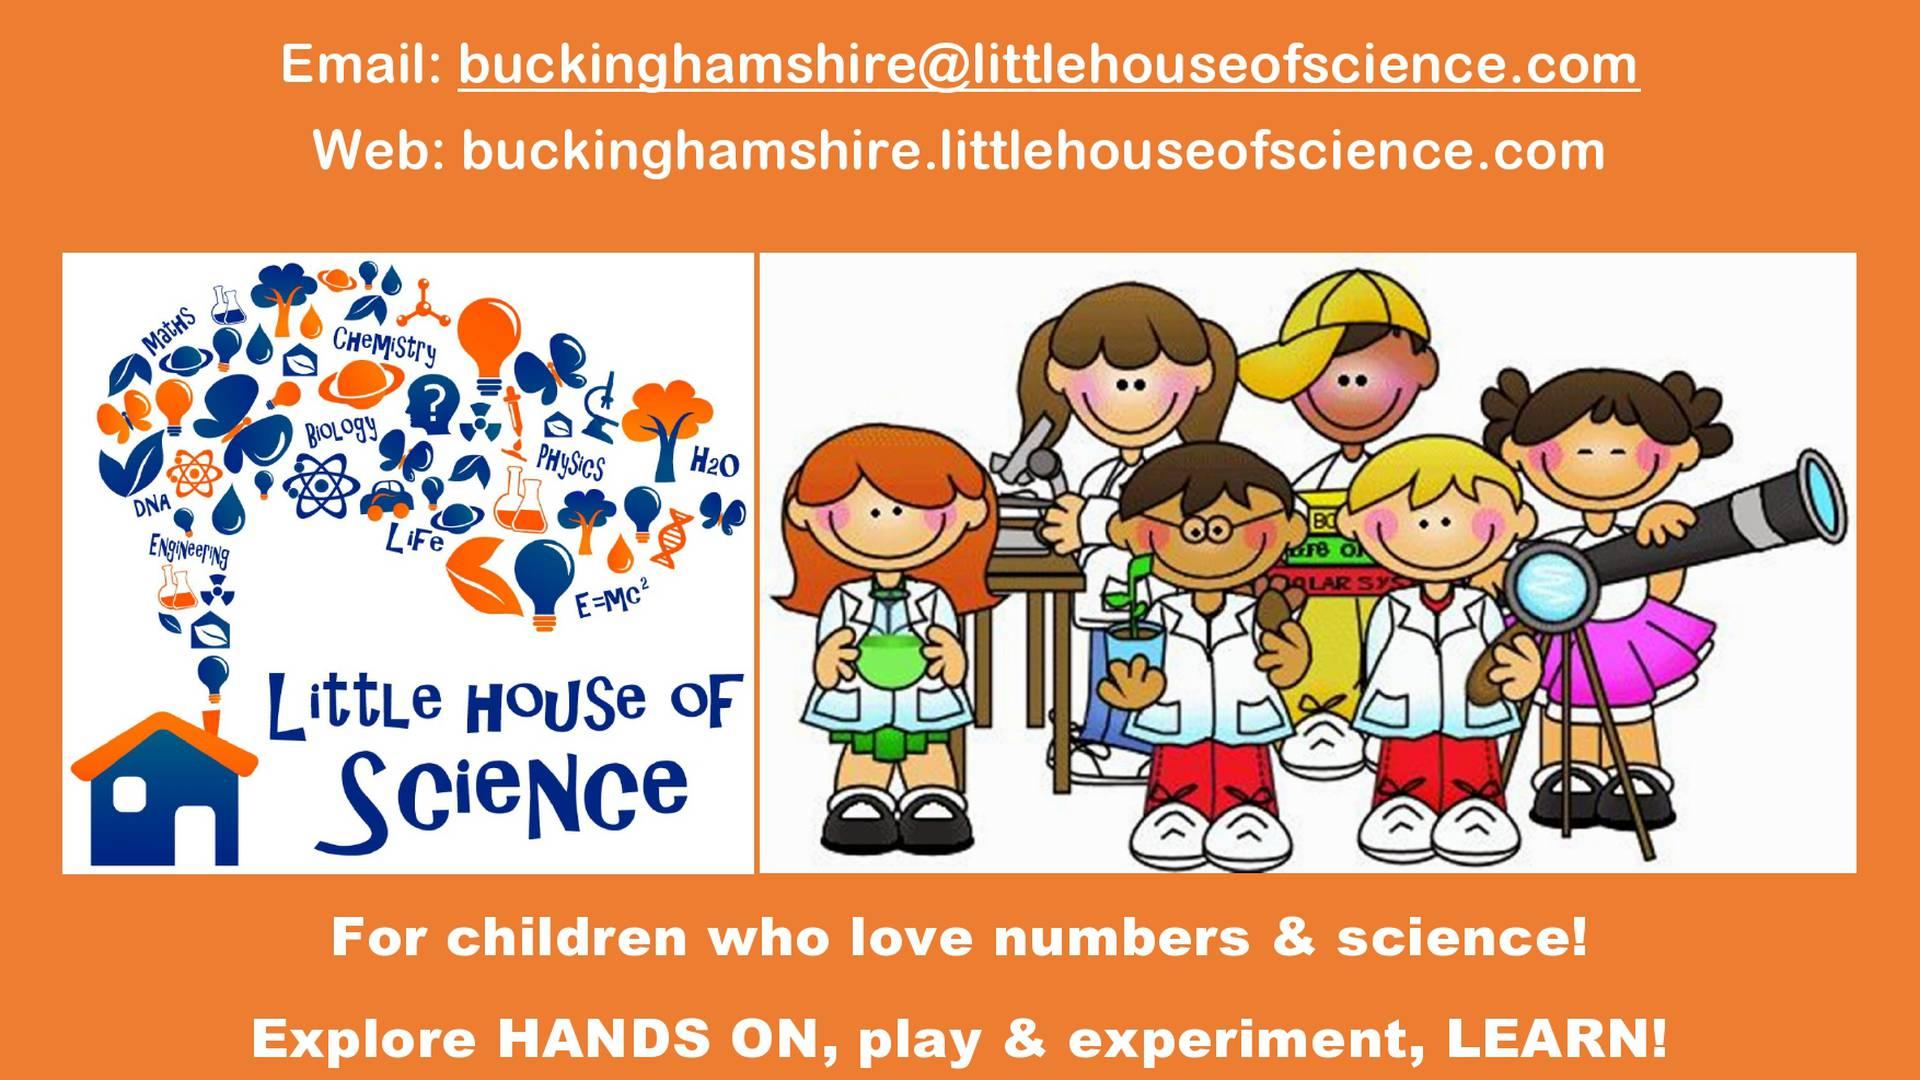 Little House of Science photo